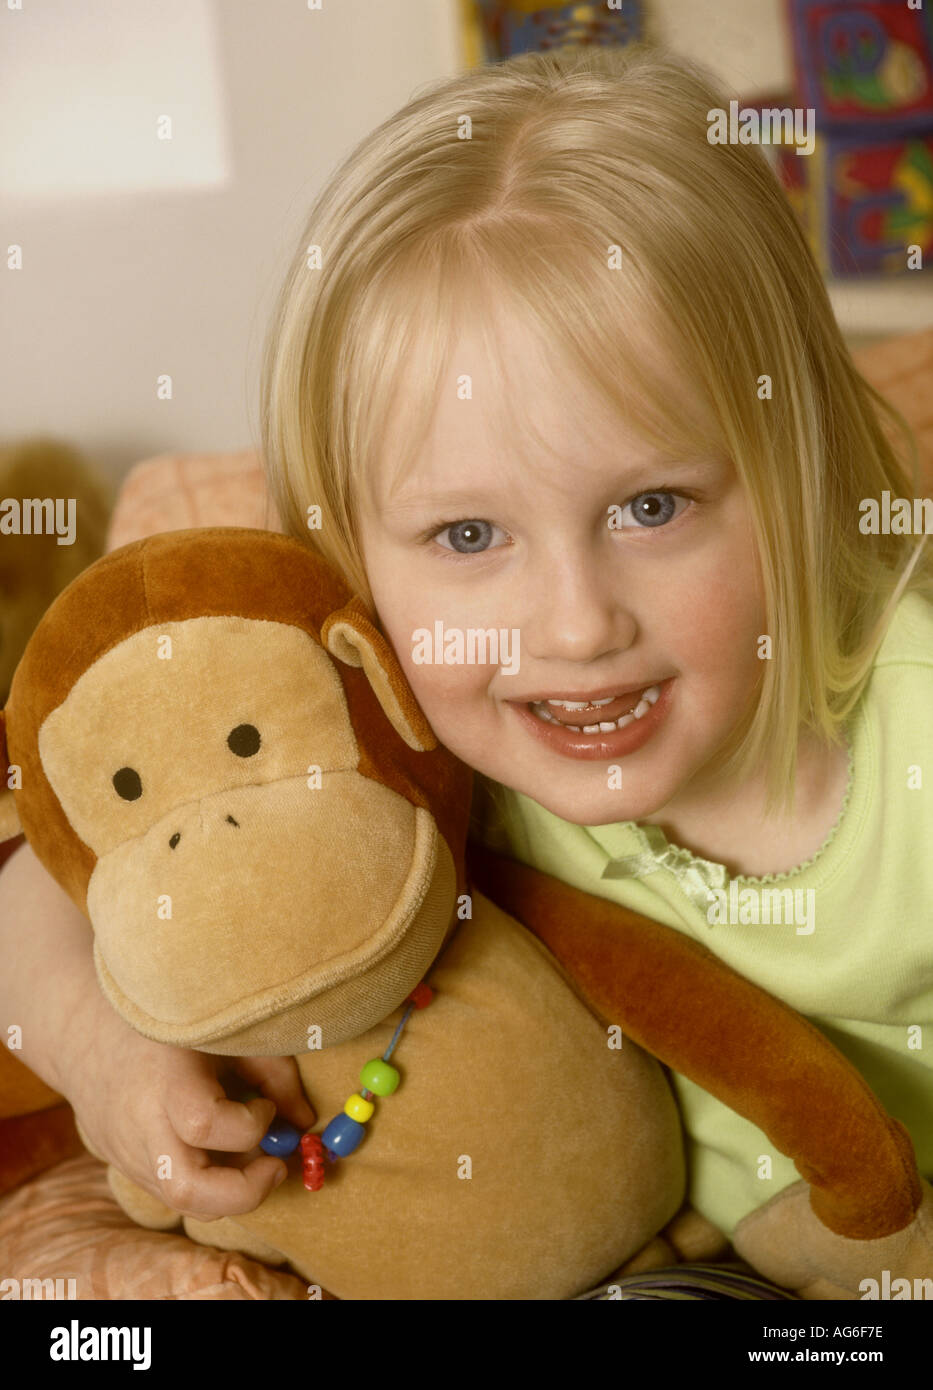 Young girl cuddling a soft toy laughing Stock Photo